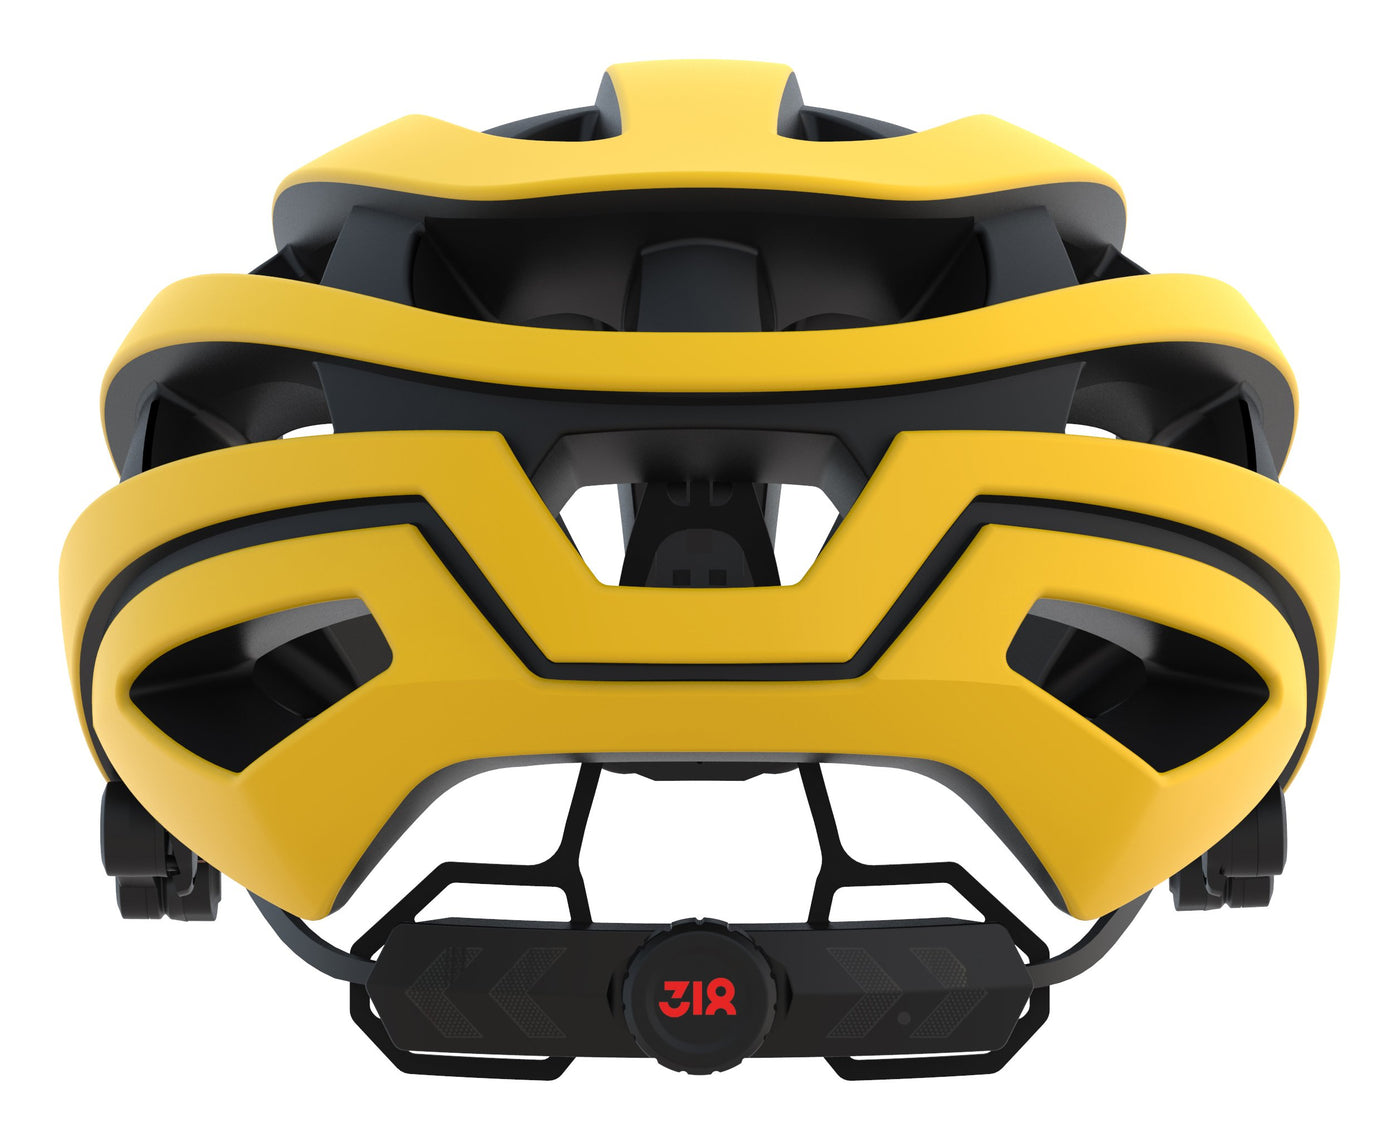 ZAKPRO Smart Cycling Helmet with Bluetooth Speakers and Sensitive Rear Alerting Lights - 318 Series - Cyclop.in